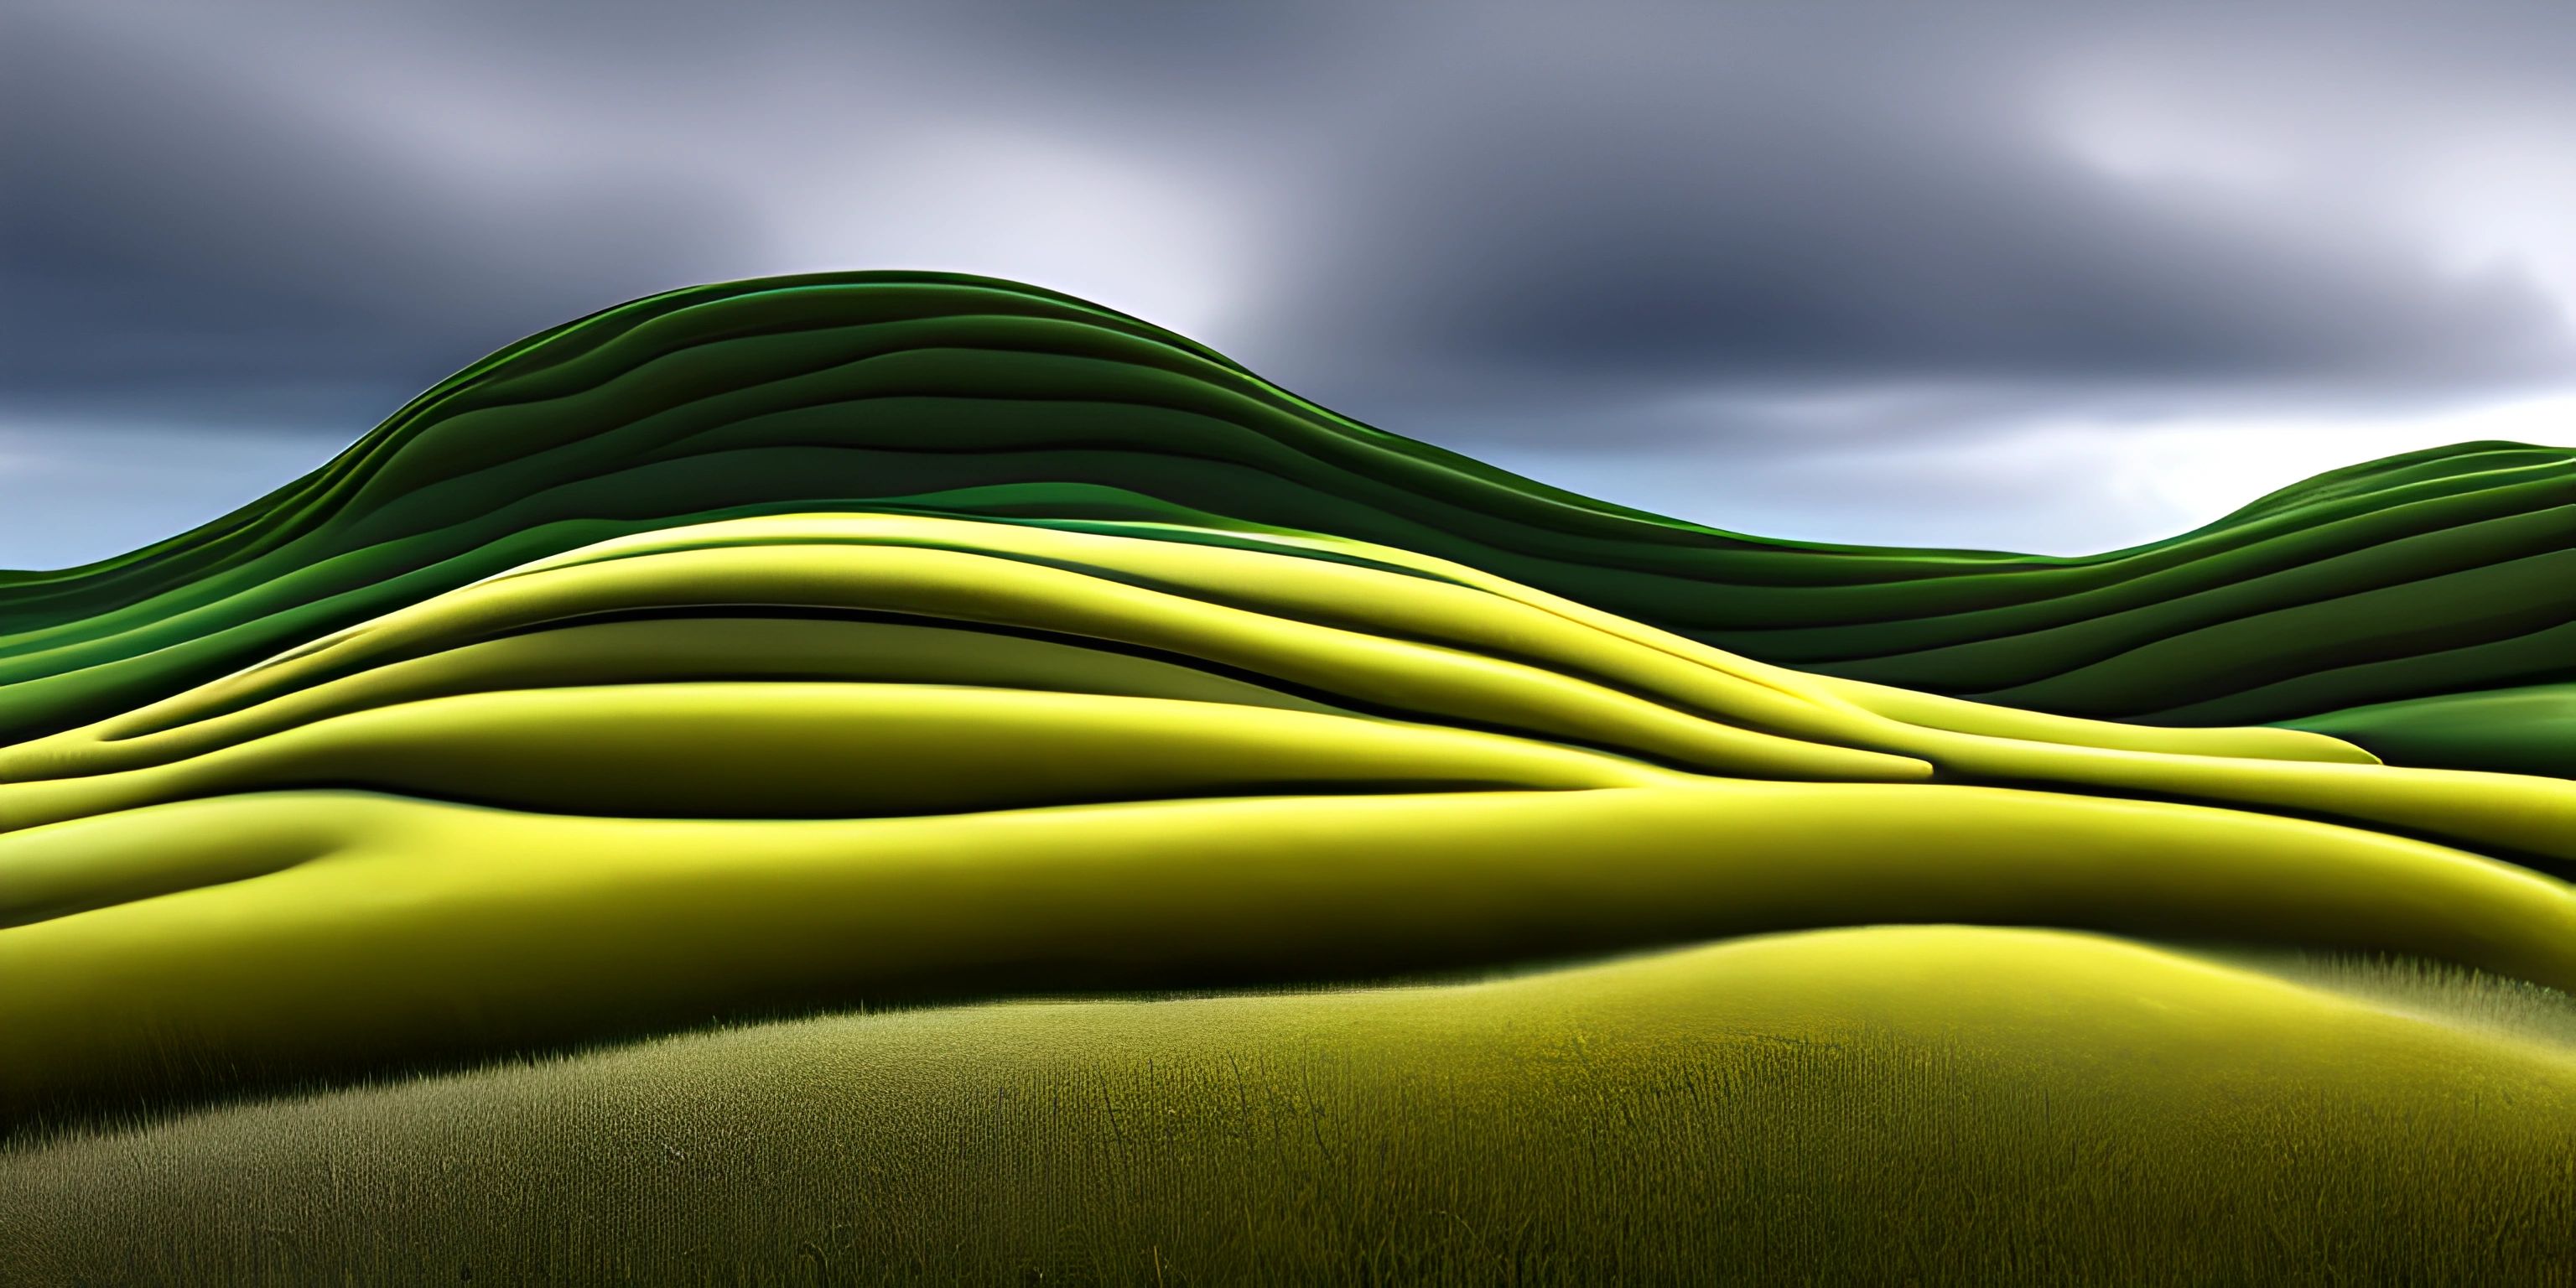 a 3d rendered image of green hills under a blue cloudy sky with small clouds above them